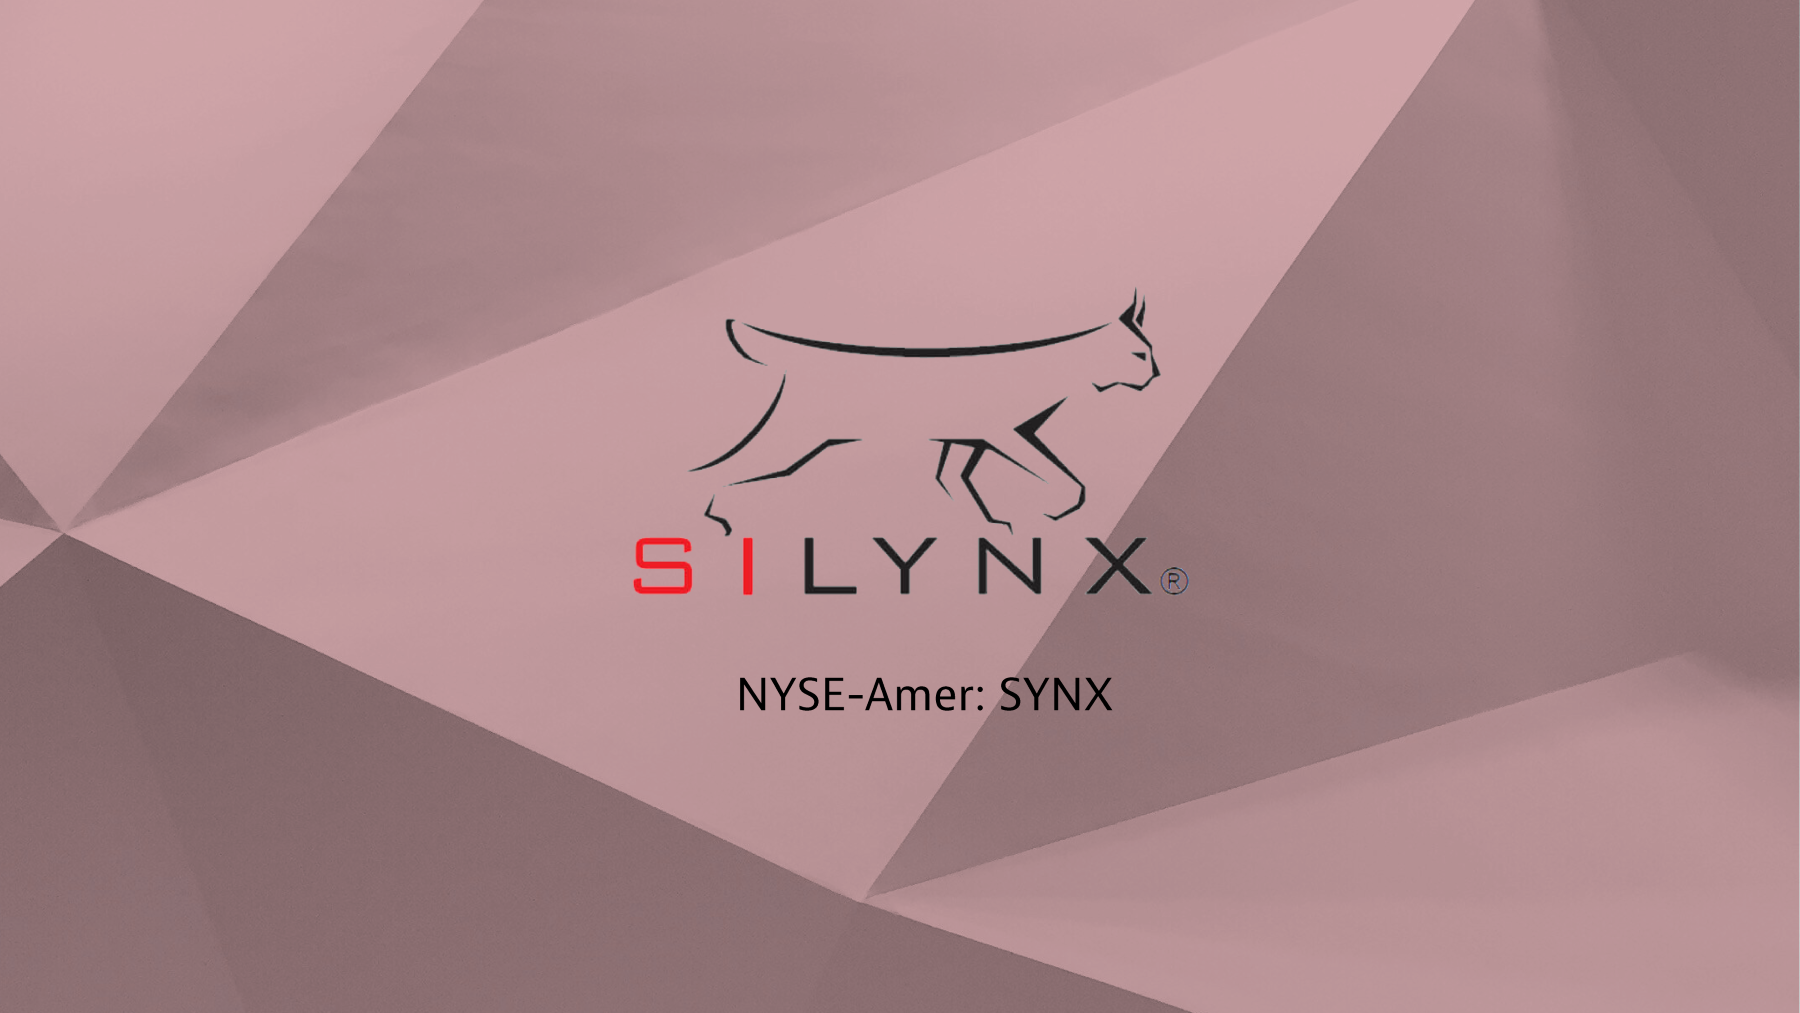 In Focus: Demand For Silynxcom’s Innovative Communication Devices Steepens Revenue Trajectory ($SYNX) 